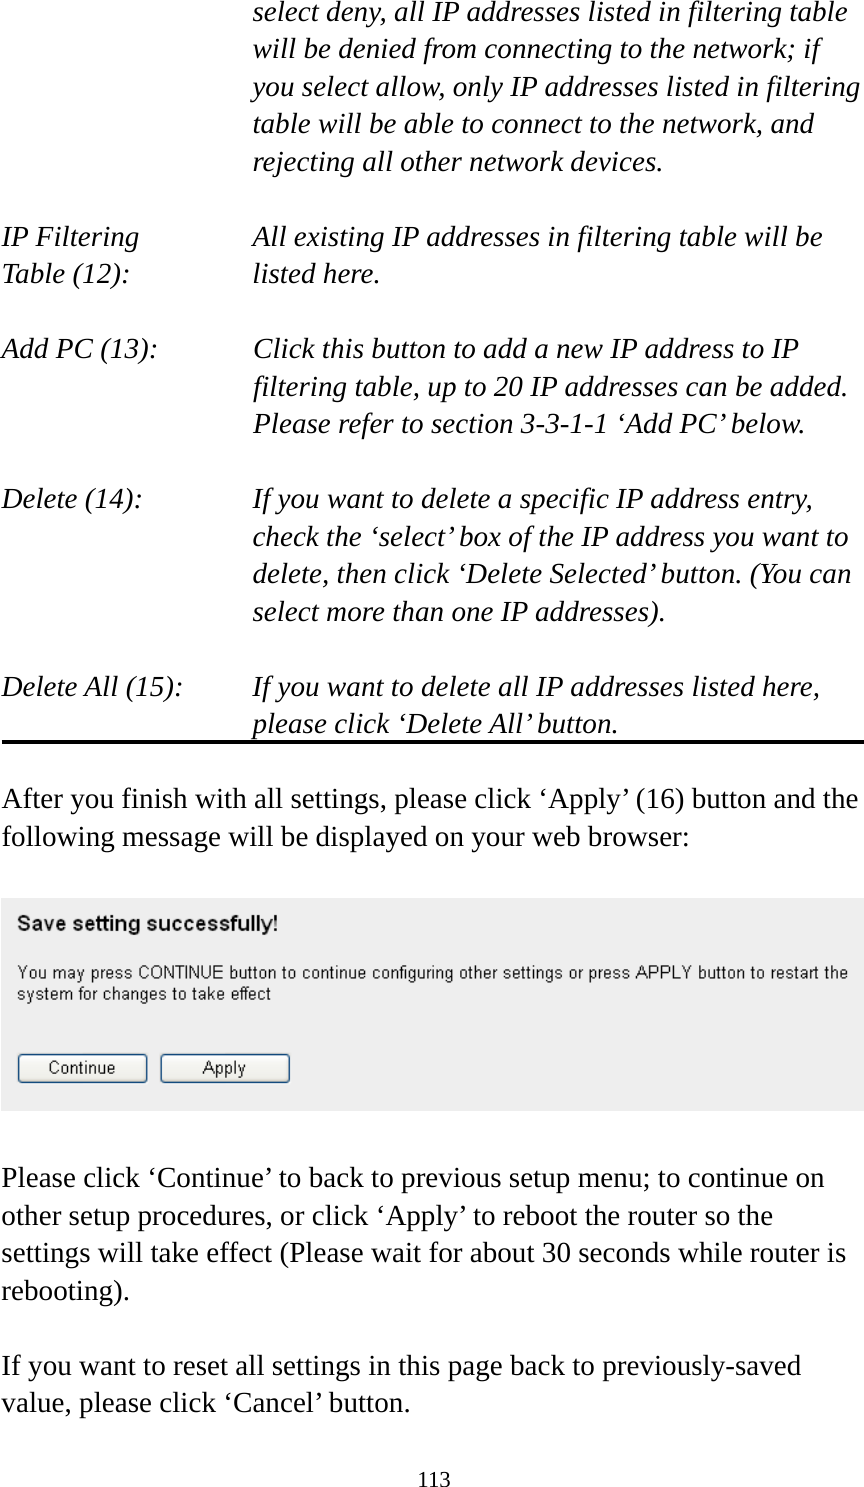 113 select deny, all IP addresses listed in filtering table will be denied from connecting to the network; if you select allow, only IP addresses listed in filtering table will be able to connect to the network, and rejecting all other network devices.  IP Filtering      All existing IP addresses in filtering table will be Table (12):       listed here.  Add PC (13):    Click this button to add a new IP address to IP filtering table, up to 20 IP addresses can be added.   Please refer to section 3-3-1-1 ‘Add PC’ below.    Delete (14):      If you want to delete a specific IP address entry,     check the ‘select’ box of the IP address you want to delete, then click ‘Delete Selected’ button. (You can select more than one IP addresses).  Delete All (15):    If you want to delete all IP addresses listed here, please click ‘Delete All’ button.  After you finish with all settings, please click ‘Apply’ (16) button and the following message will be displayed on your web browser:    Please click ‘Continue’ to back to previous setup menu; to continue on other setup procedures, or click ‘Apply’ to reboot the router so the settings will take effect (Please wait for about 30 seconds while router is rebooting).  If you want to reset all settings in this page back to previously-saved value, please click ‘Cancel’ button. 